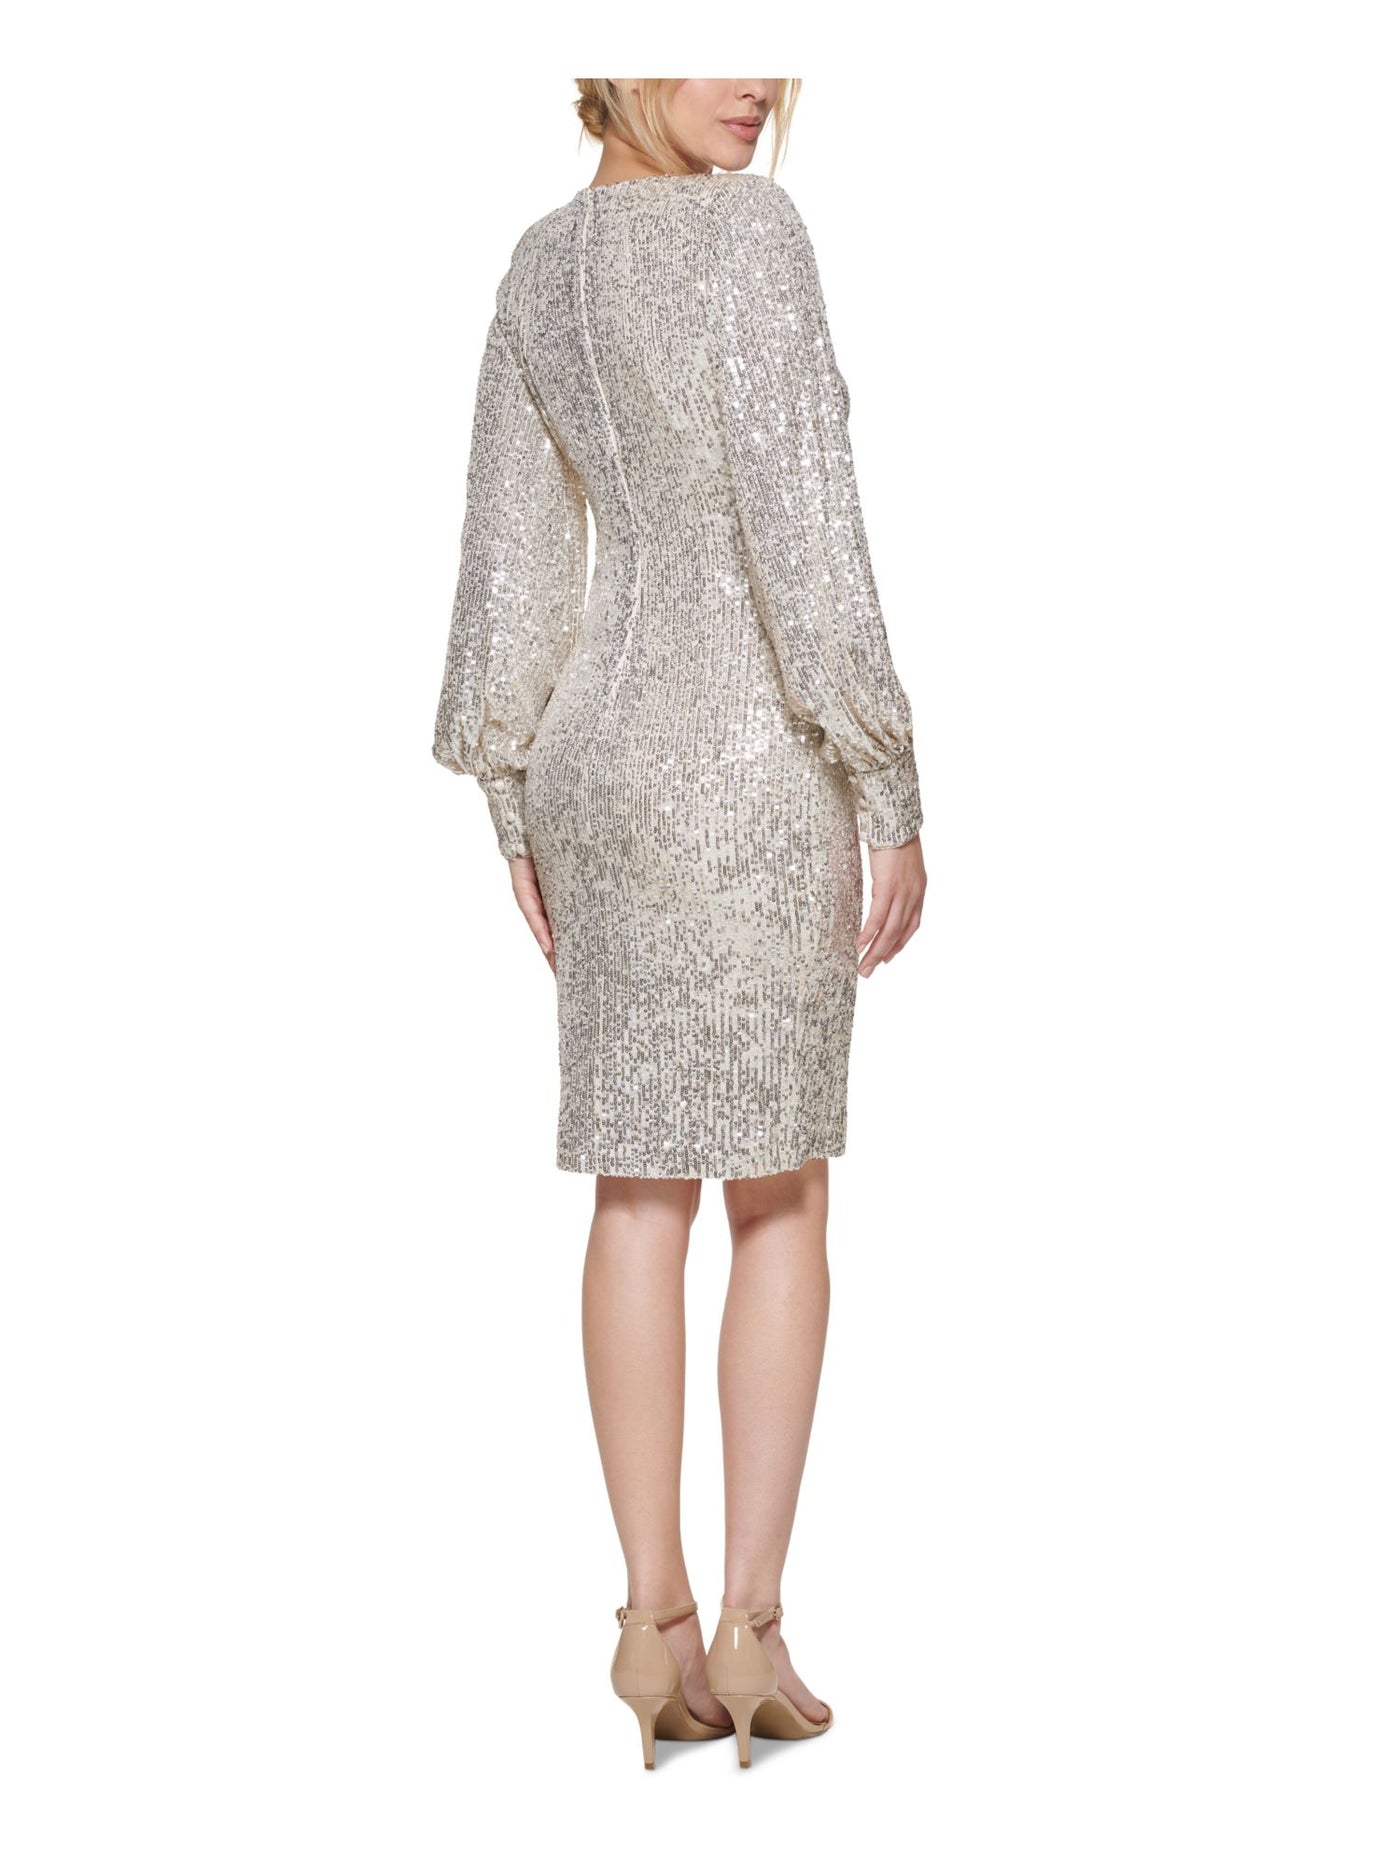 ELIZA J Womens Beige Stretch Sequined Zippered Lined Balloon Sleeve Keyhole Above The Knee Cocktail Sheath Dress 6